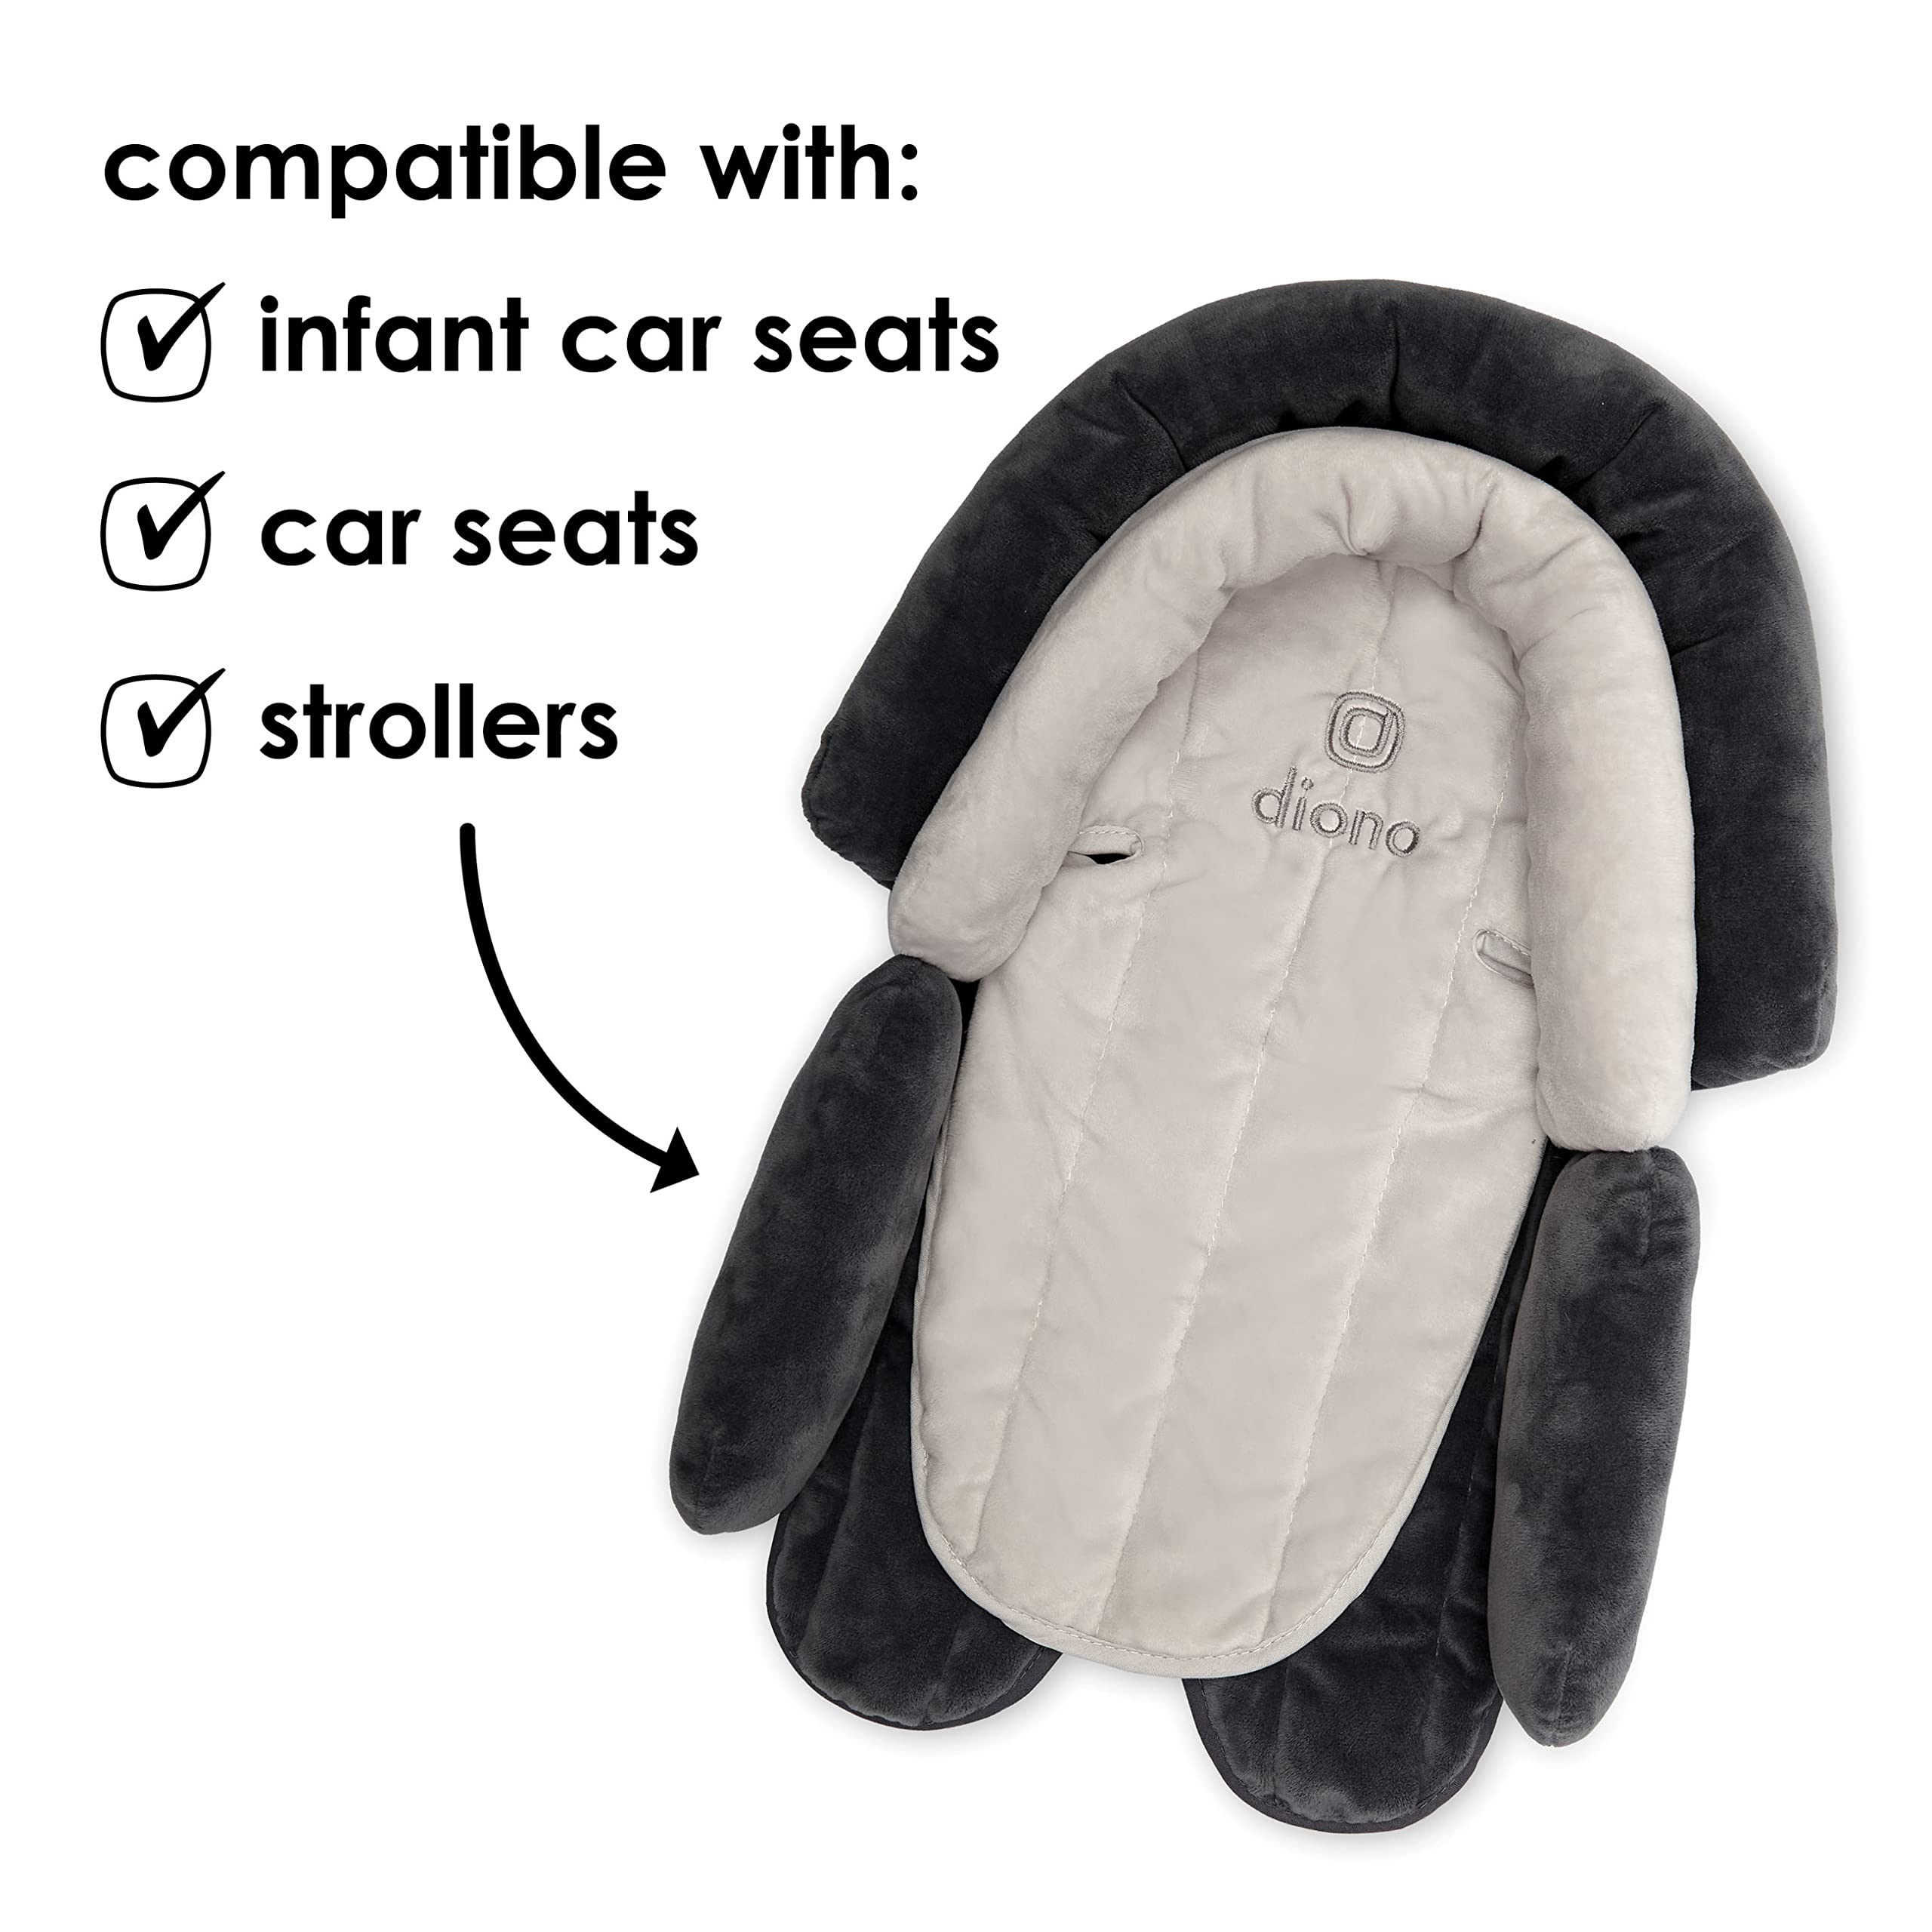 Diono Cuddle Soft 2-in-1 Baby Head Neck Body Support Pillow for Newborn Baby Super Soft Car Seat Insert Cushion, Perfect for Infant Car Seats, Convertible Car Seats, Strollers, Gray/Artic